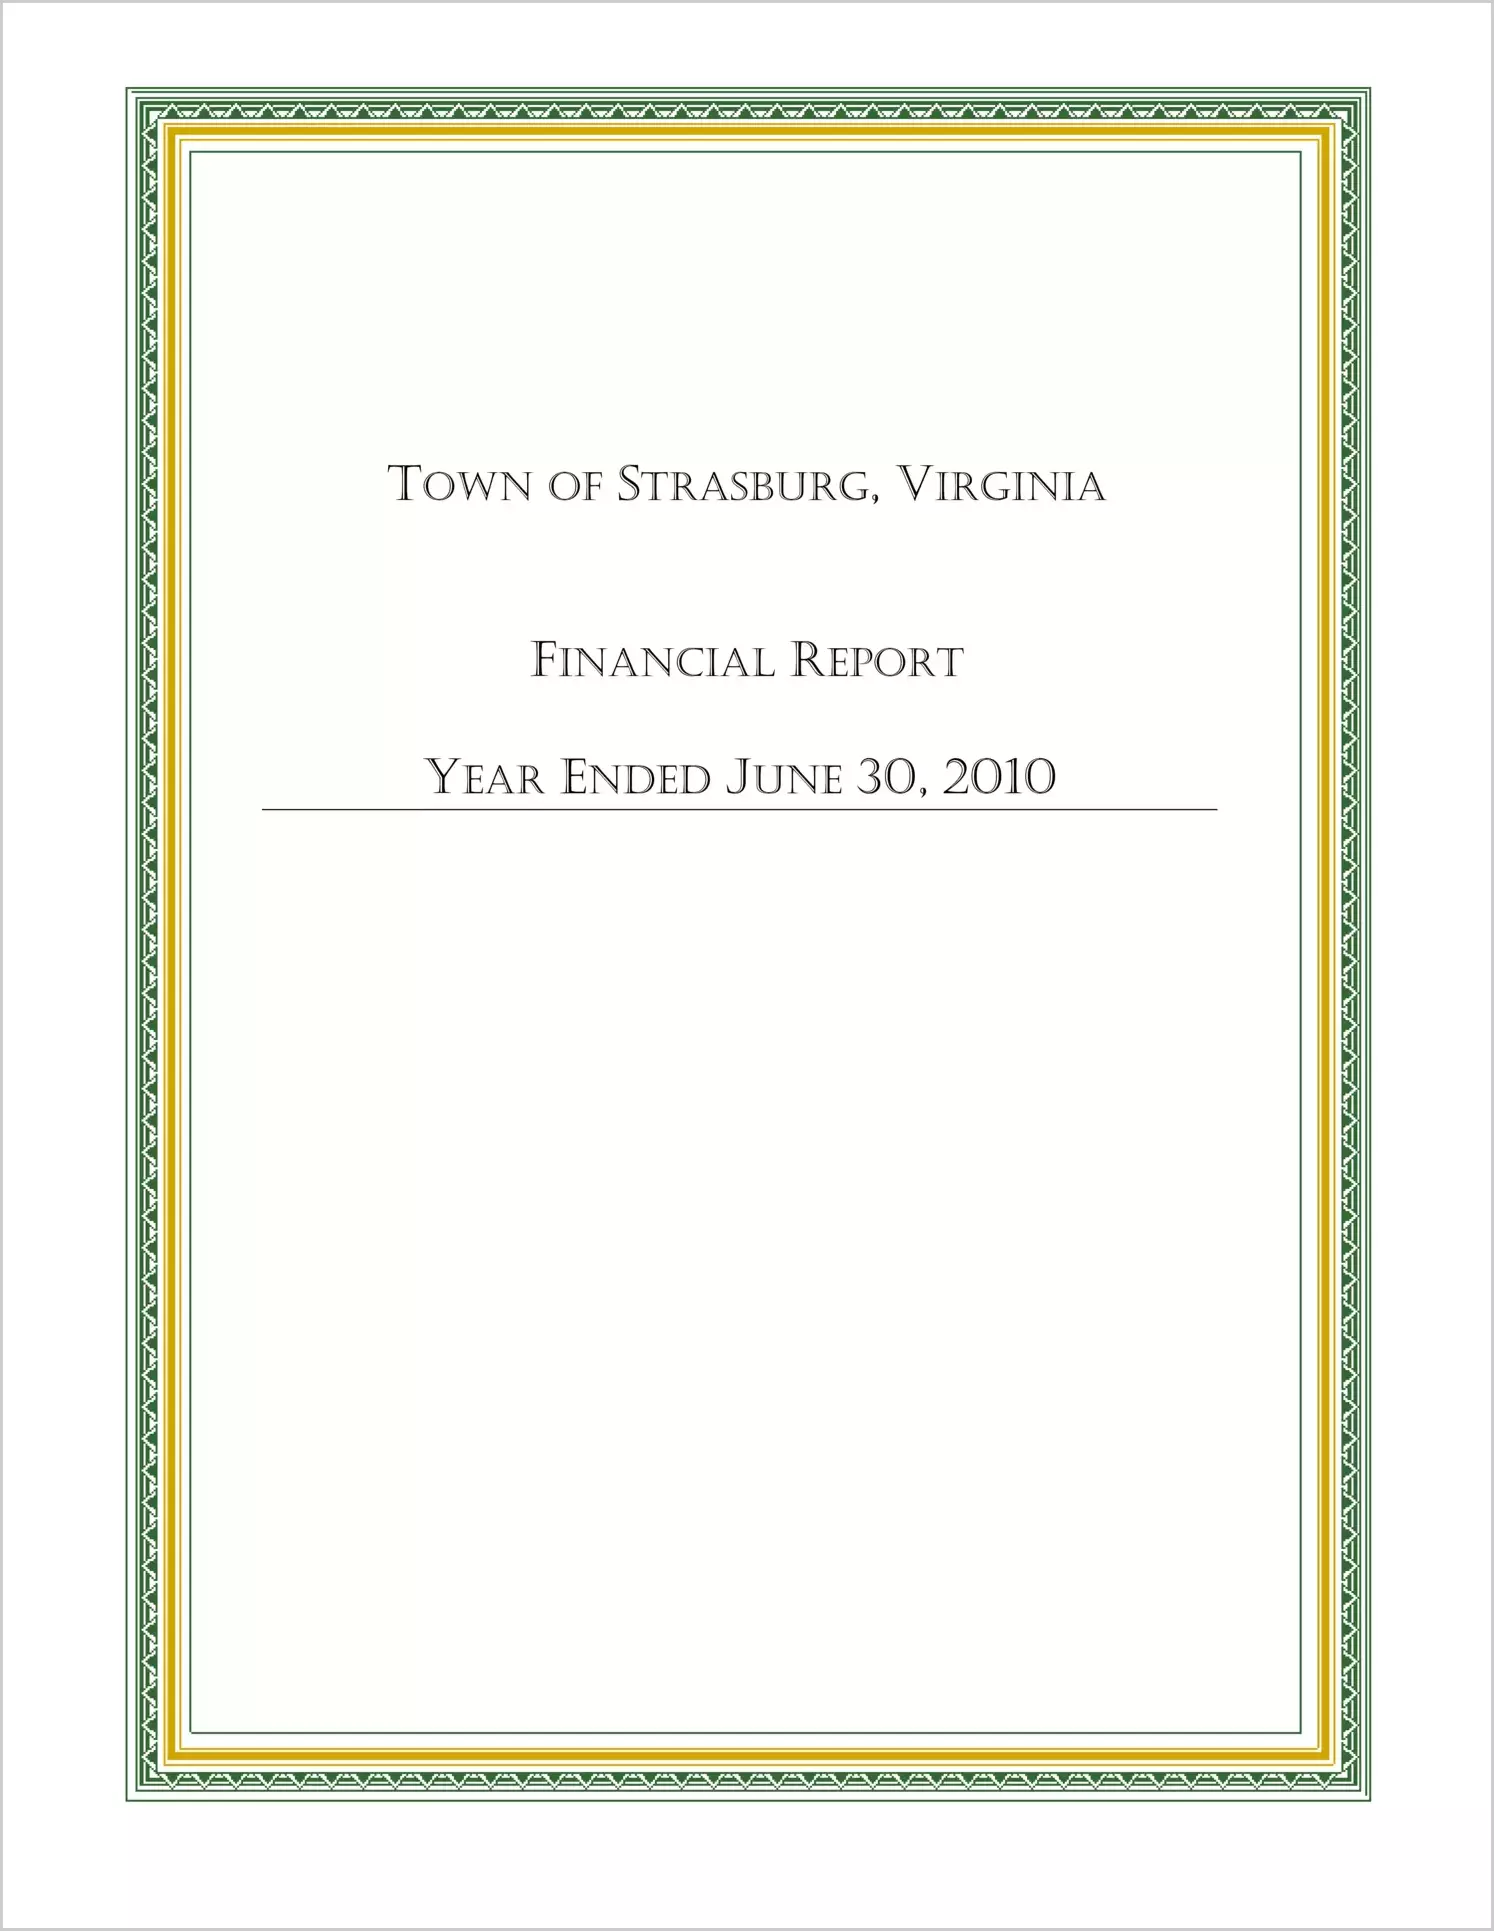 2010 Annual Financial Report for Town of Strasburg